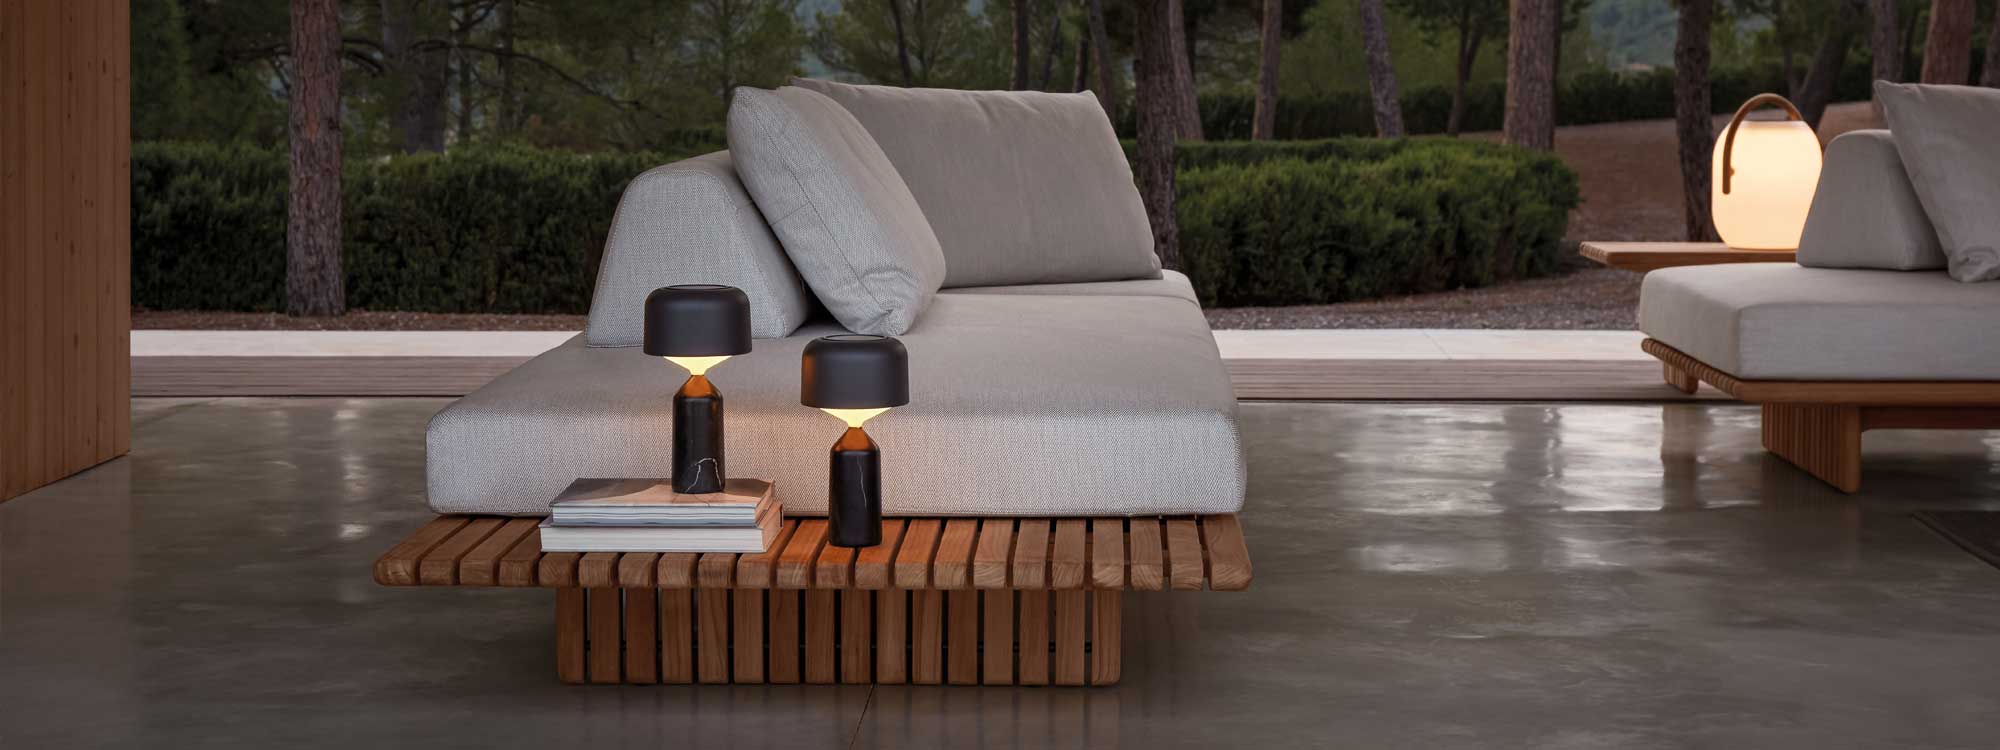 Image of Deck minimalist teak garden sofa and Pebble outdoor lights by Gloster